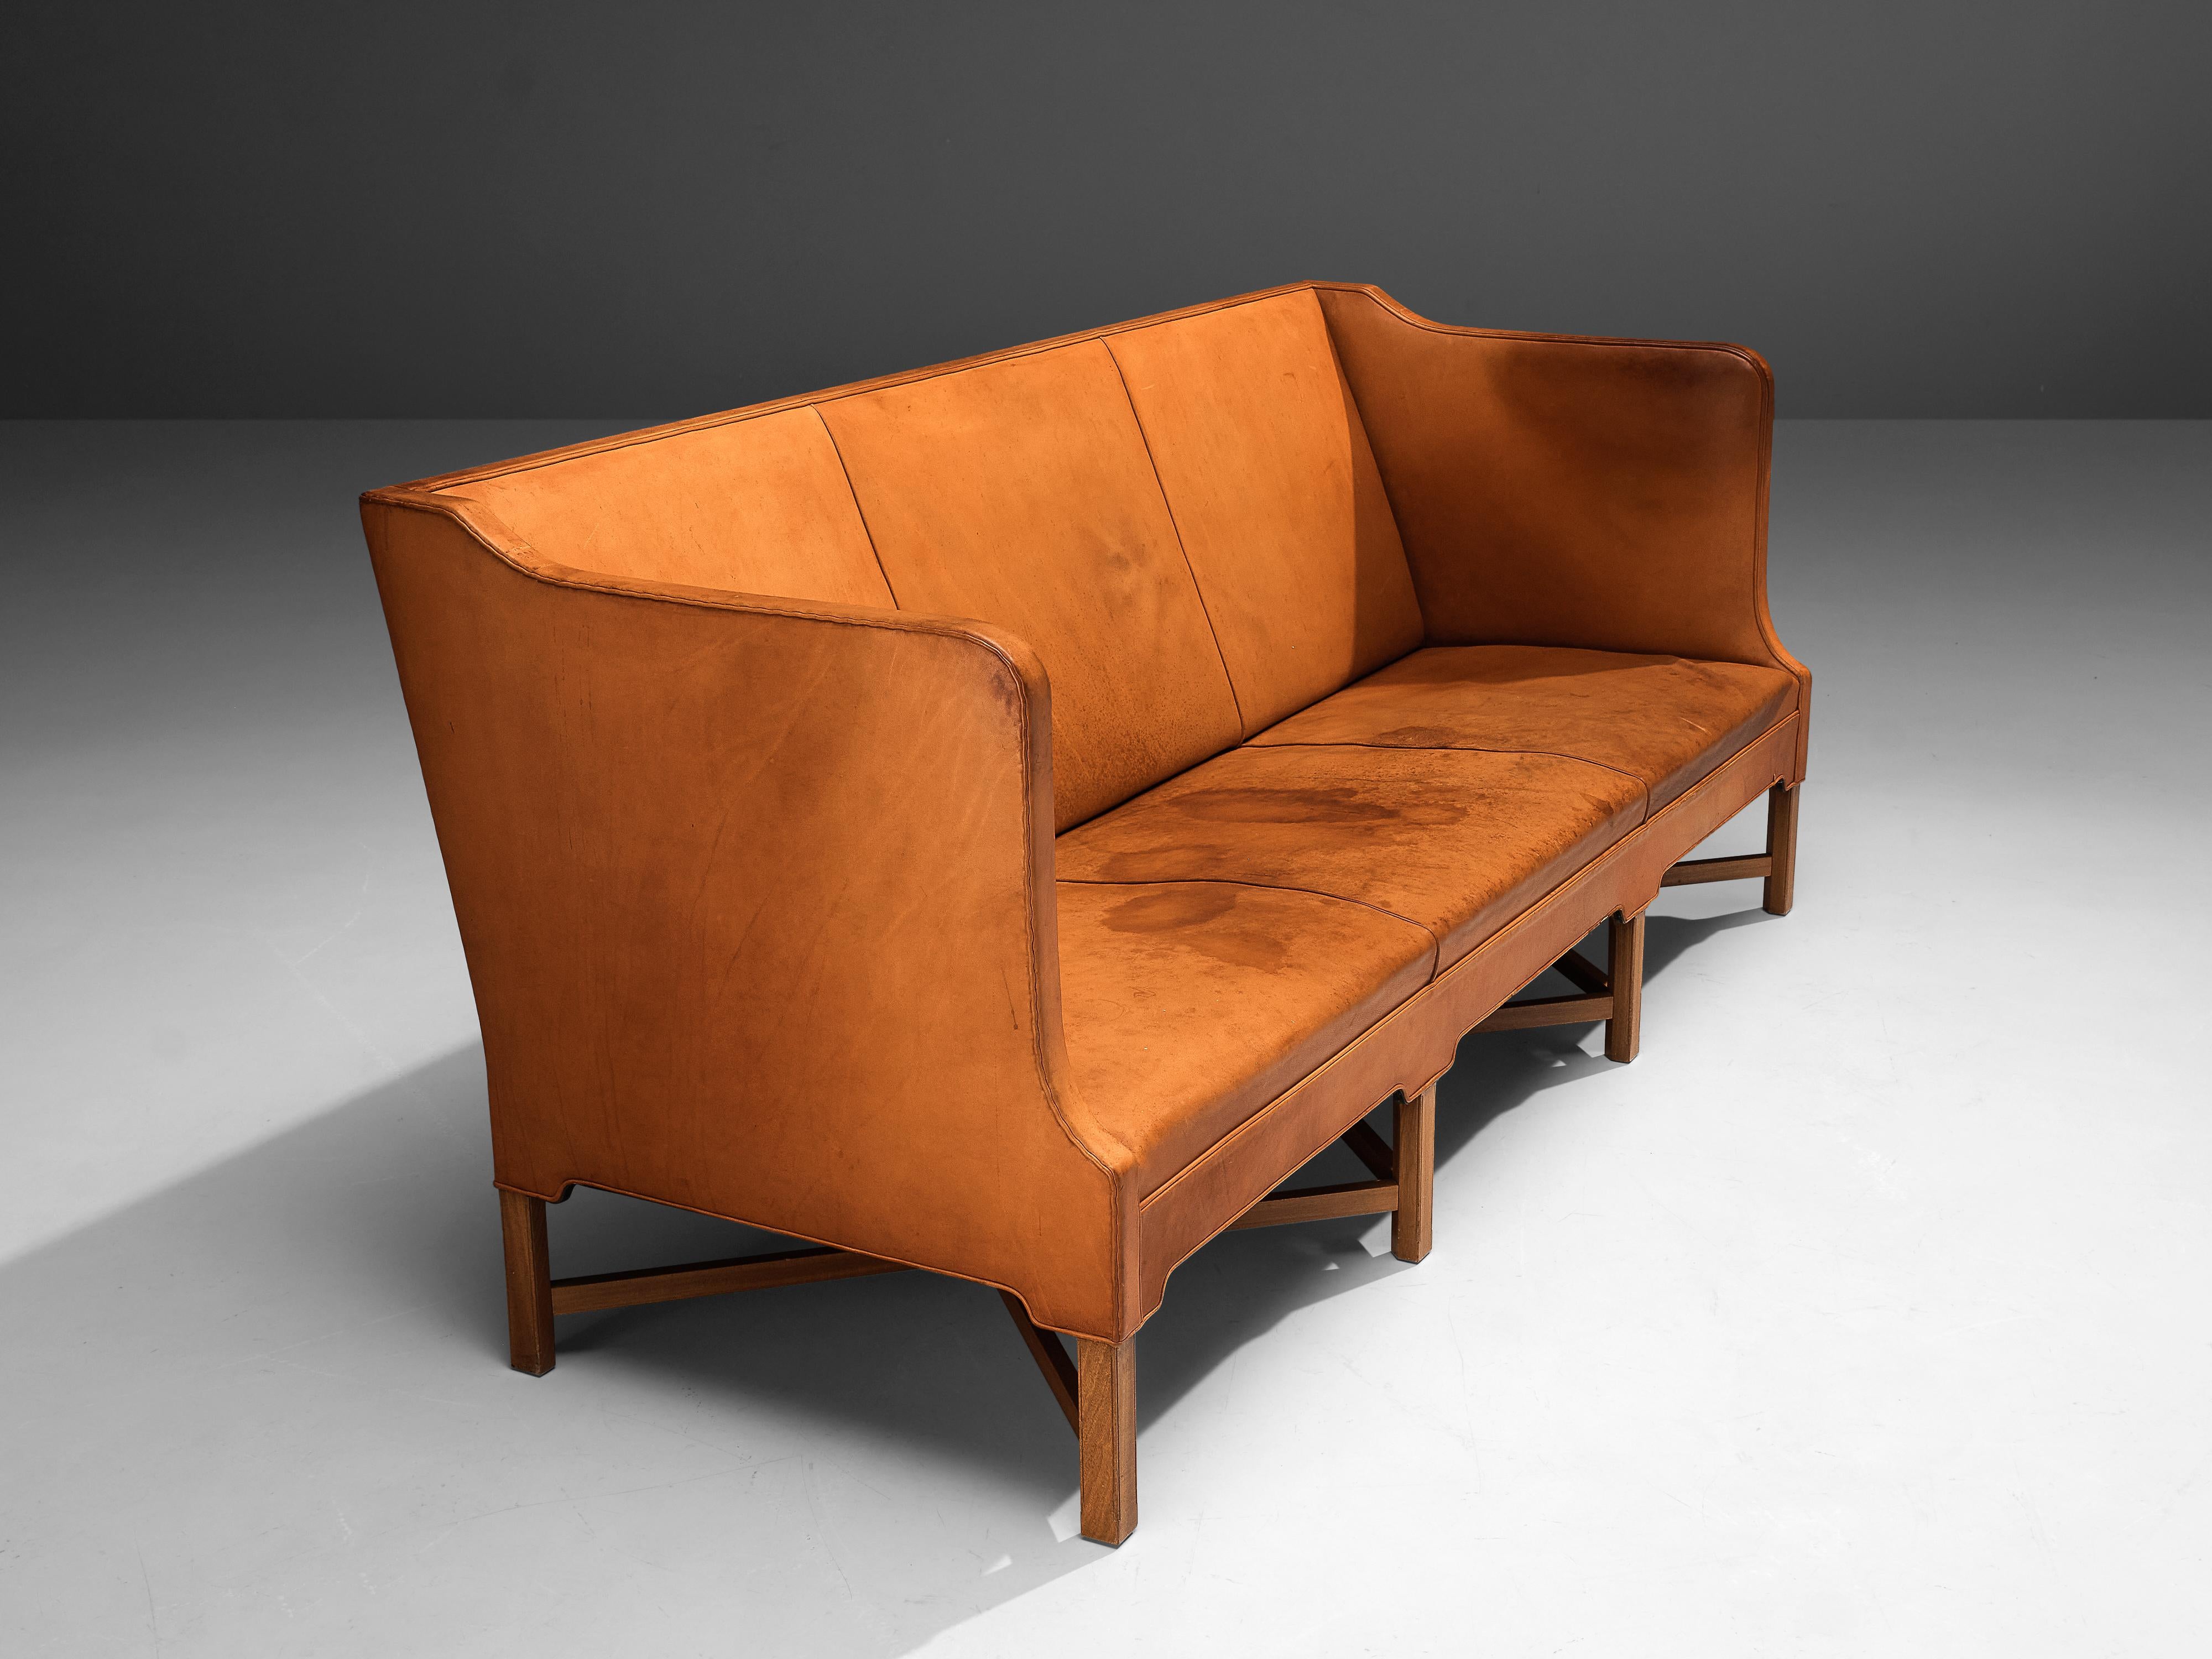 Kaare Klint for Rud Rasmussen, sofa model 4118, leather, mahogany, Denmark, design 1929

Classic and elegant Scandinavian three-seat sofa by Kaare Klint designed in 1929. The base consists of eight legs in mahogany with X-shaped cross-connections,